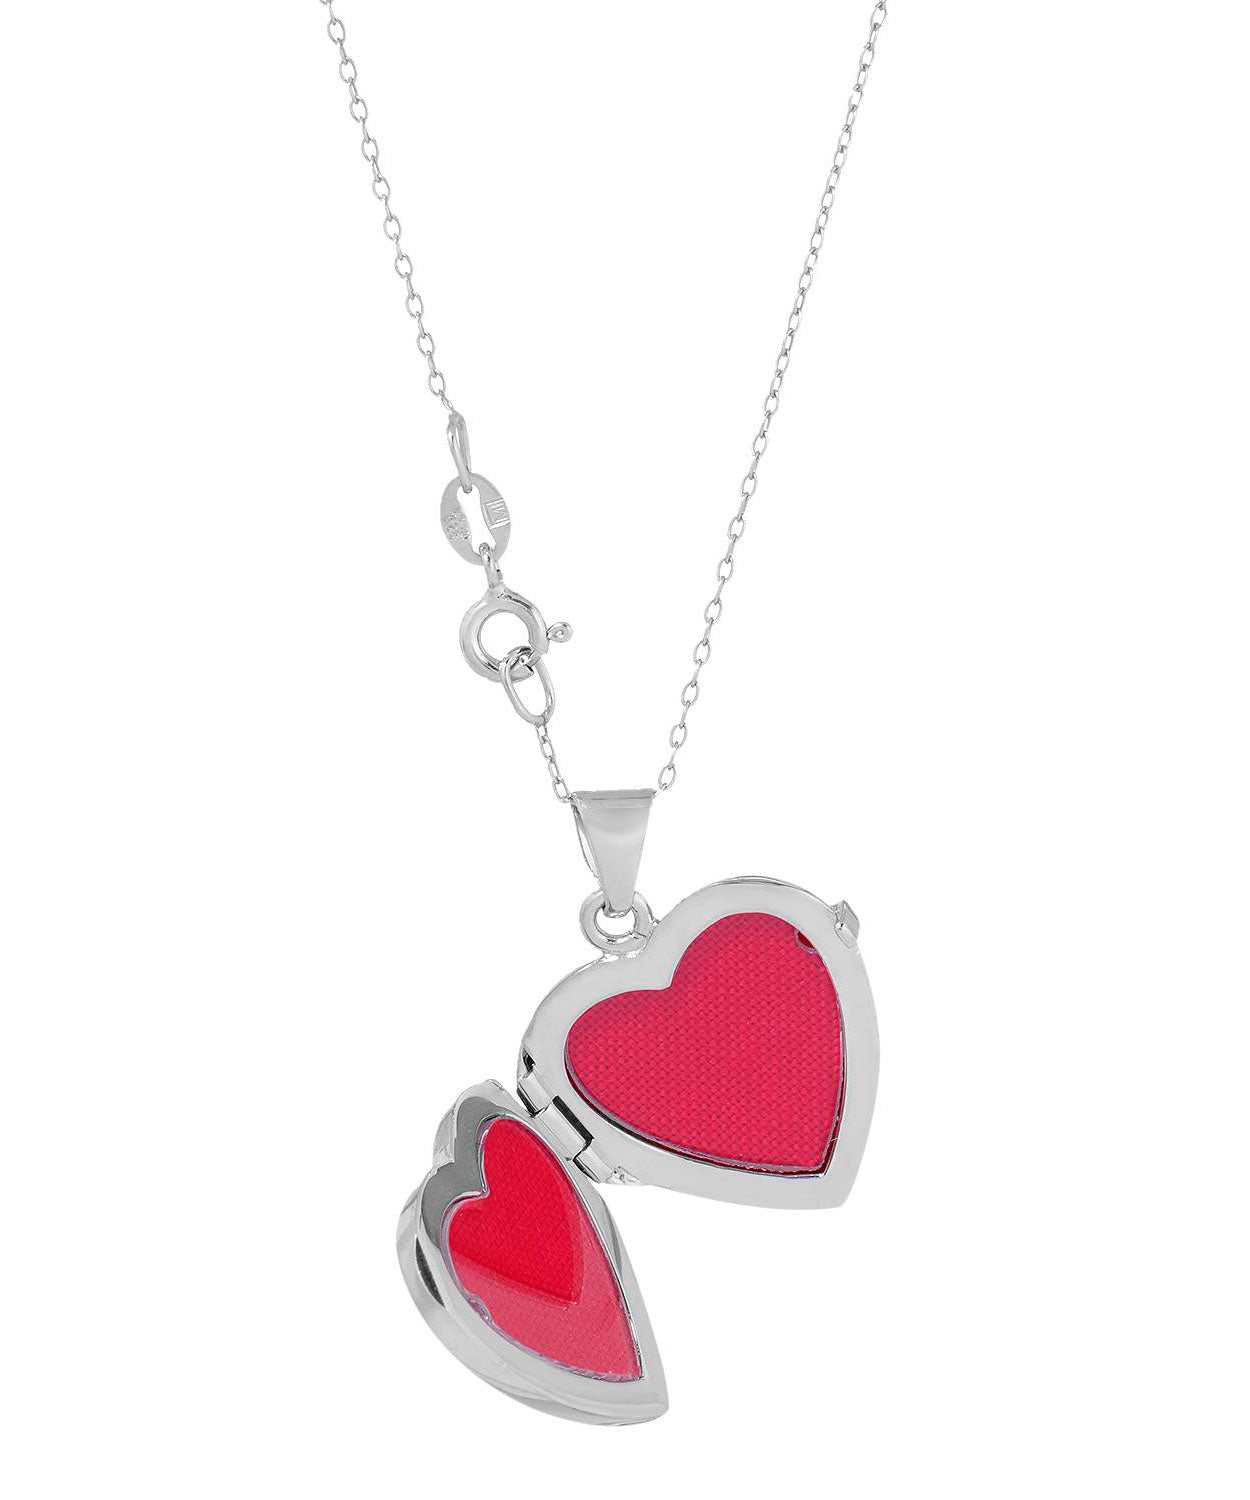 925 Sterling Silver & Enamel Heart Locket Pendant With Chain - Made in Italy View 2